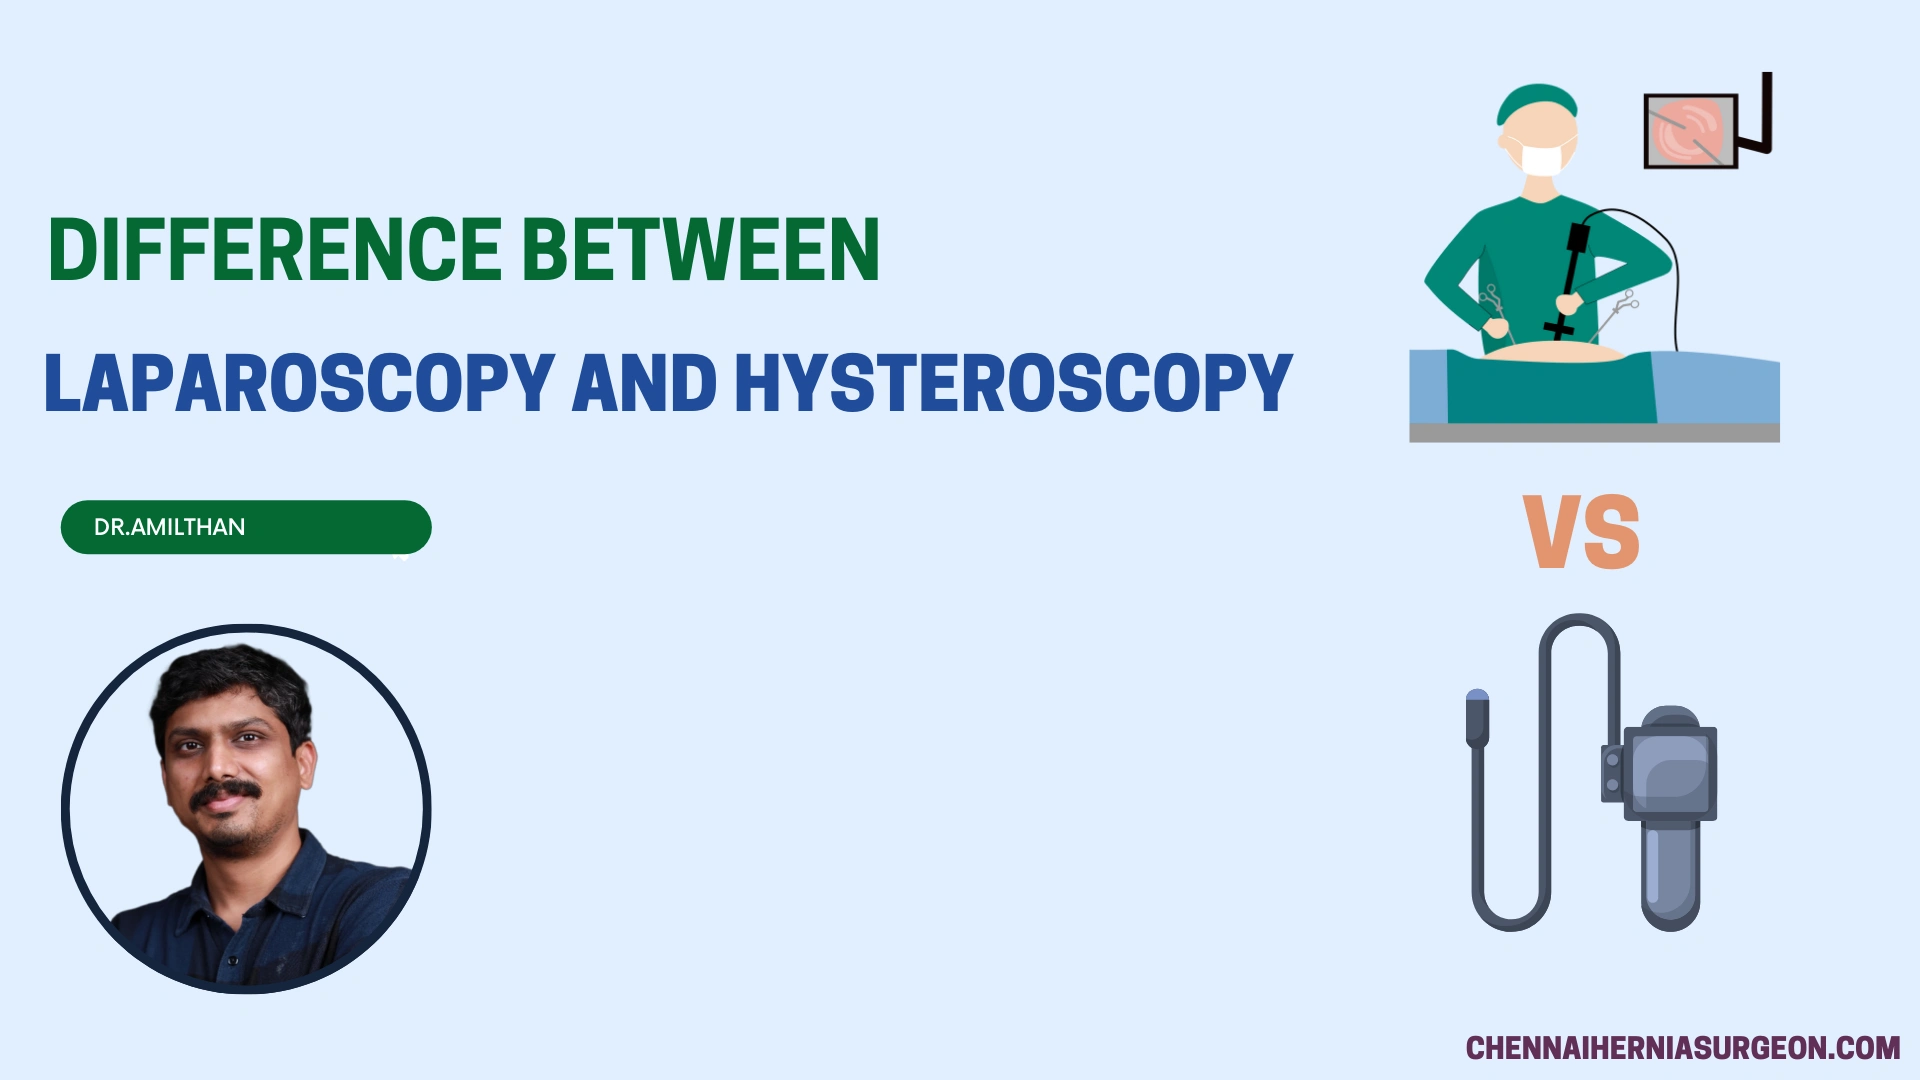 Difference Between Laparoscopy and Hysteroscopy